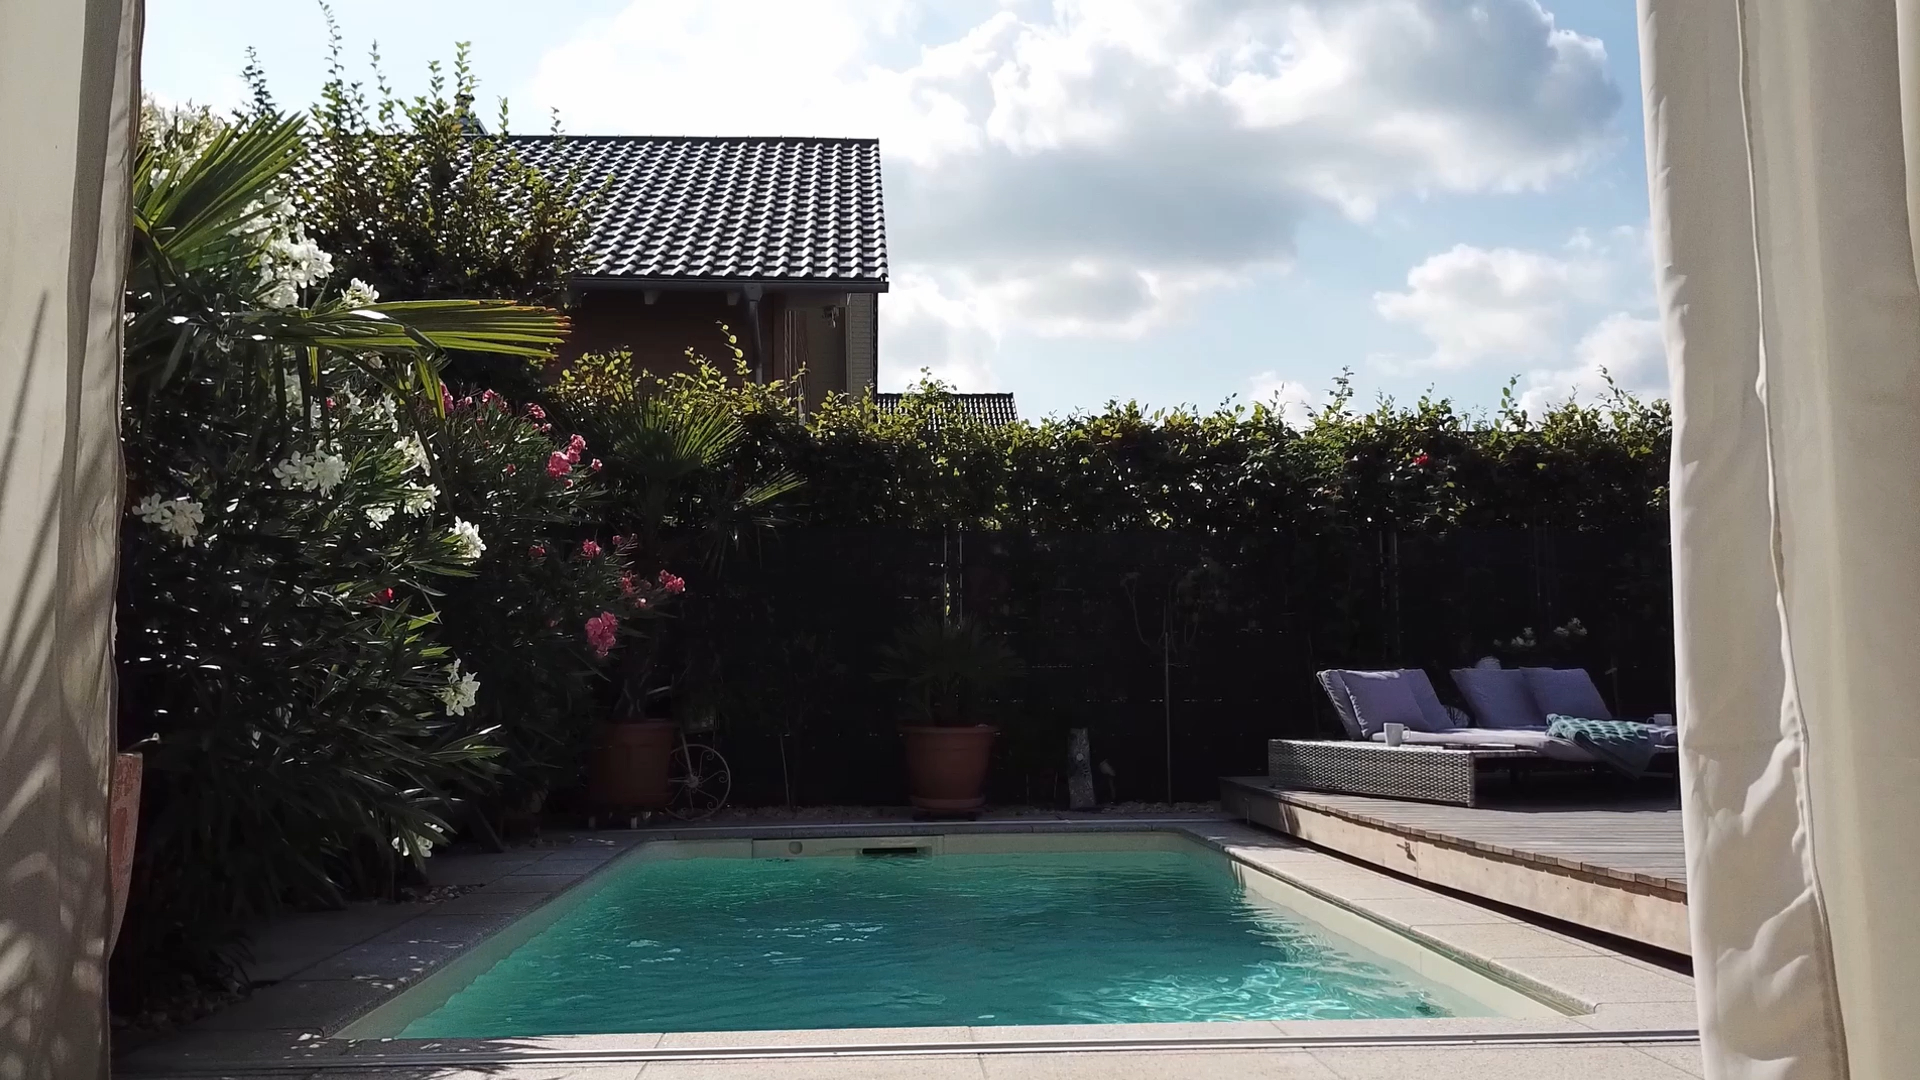 Here Are A Few Indoor Gardening Tips For The Beginner Who ... encequiconcerne Pool House 10M2